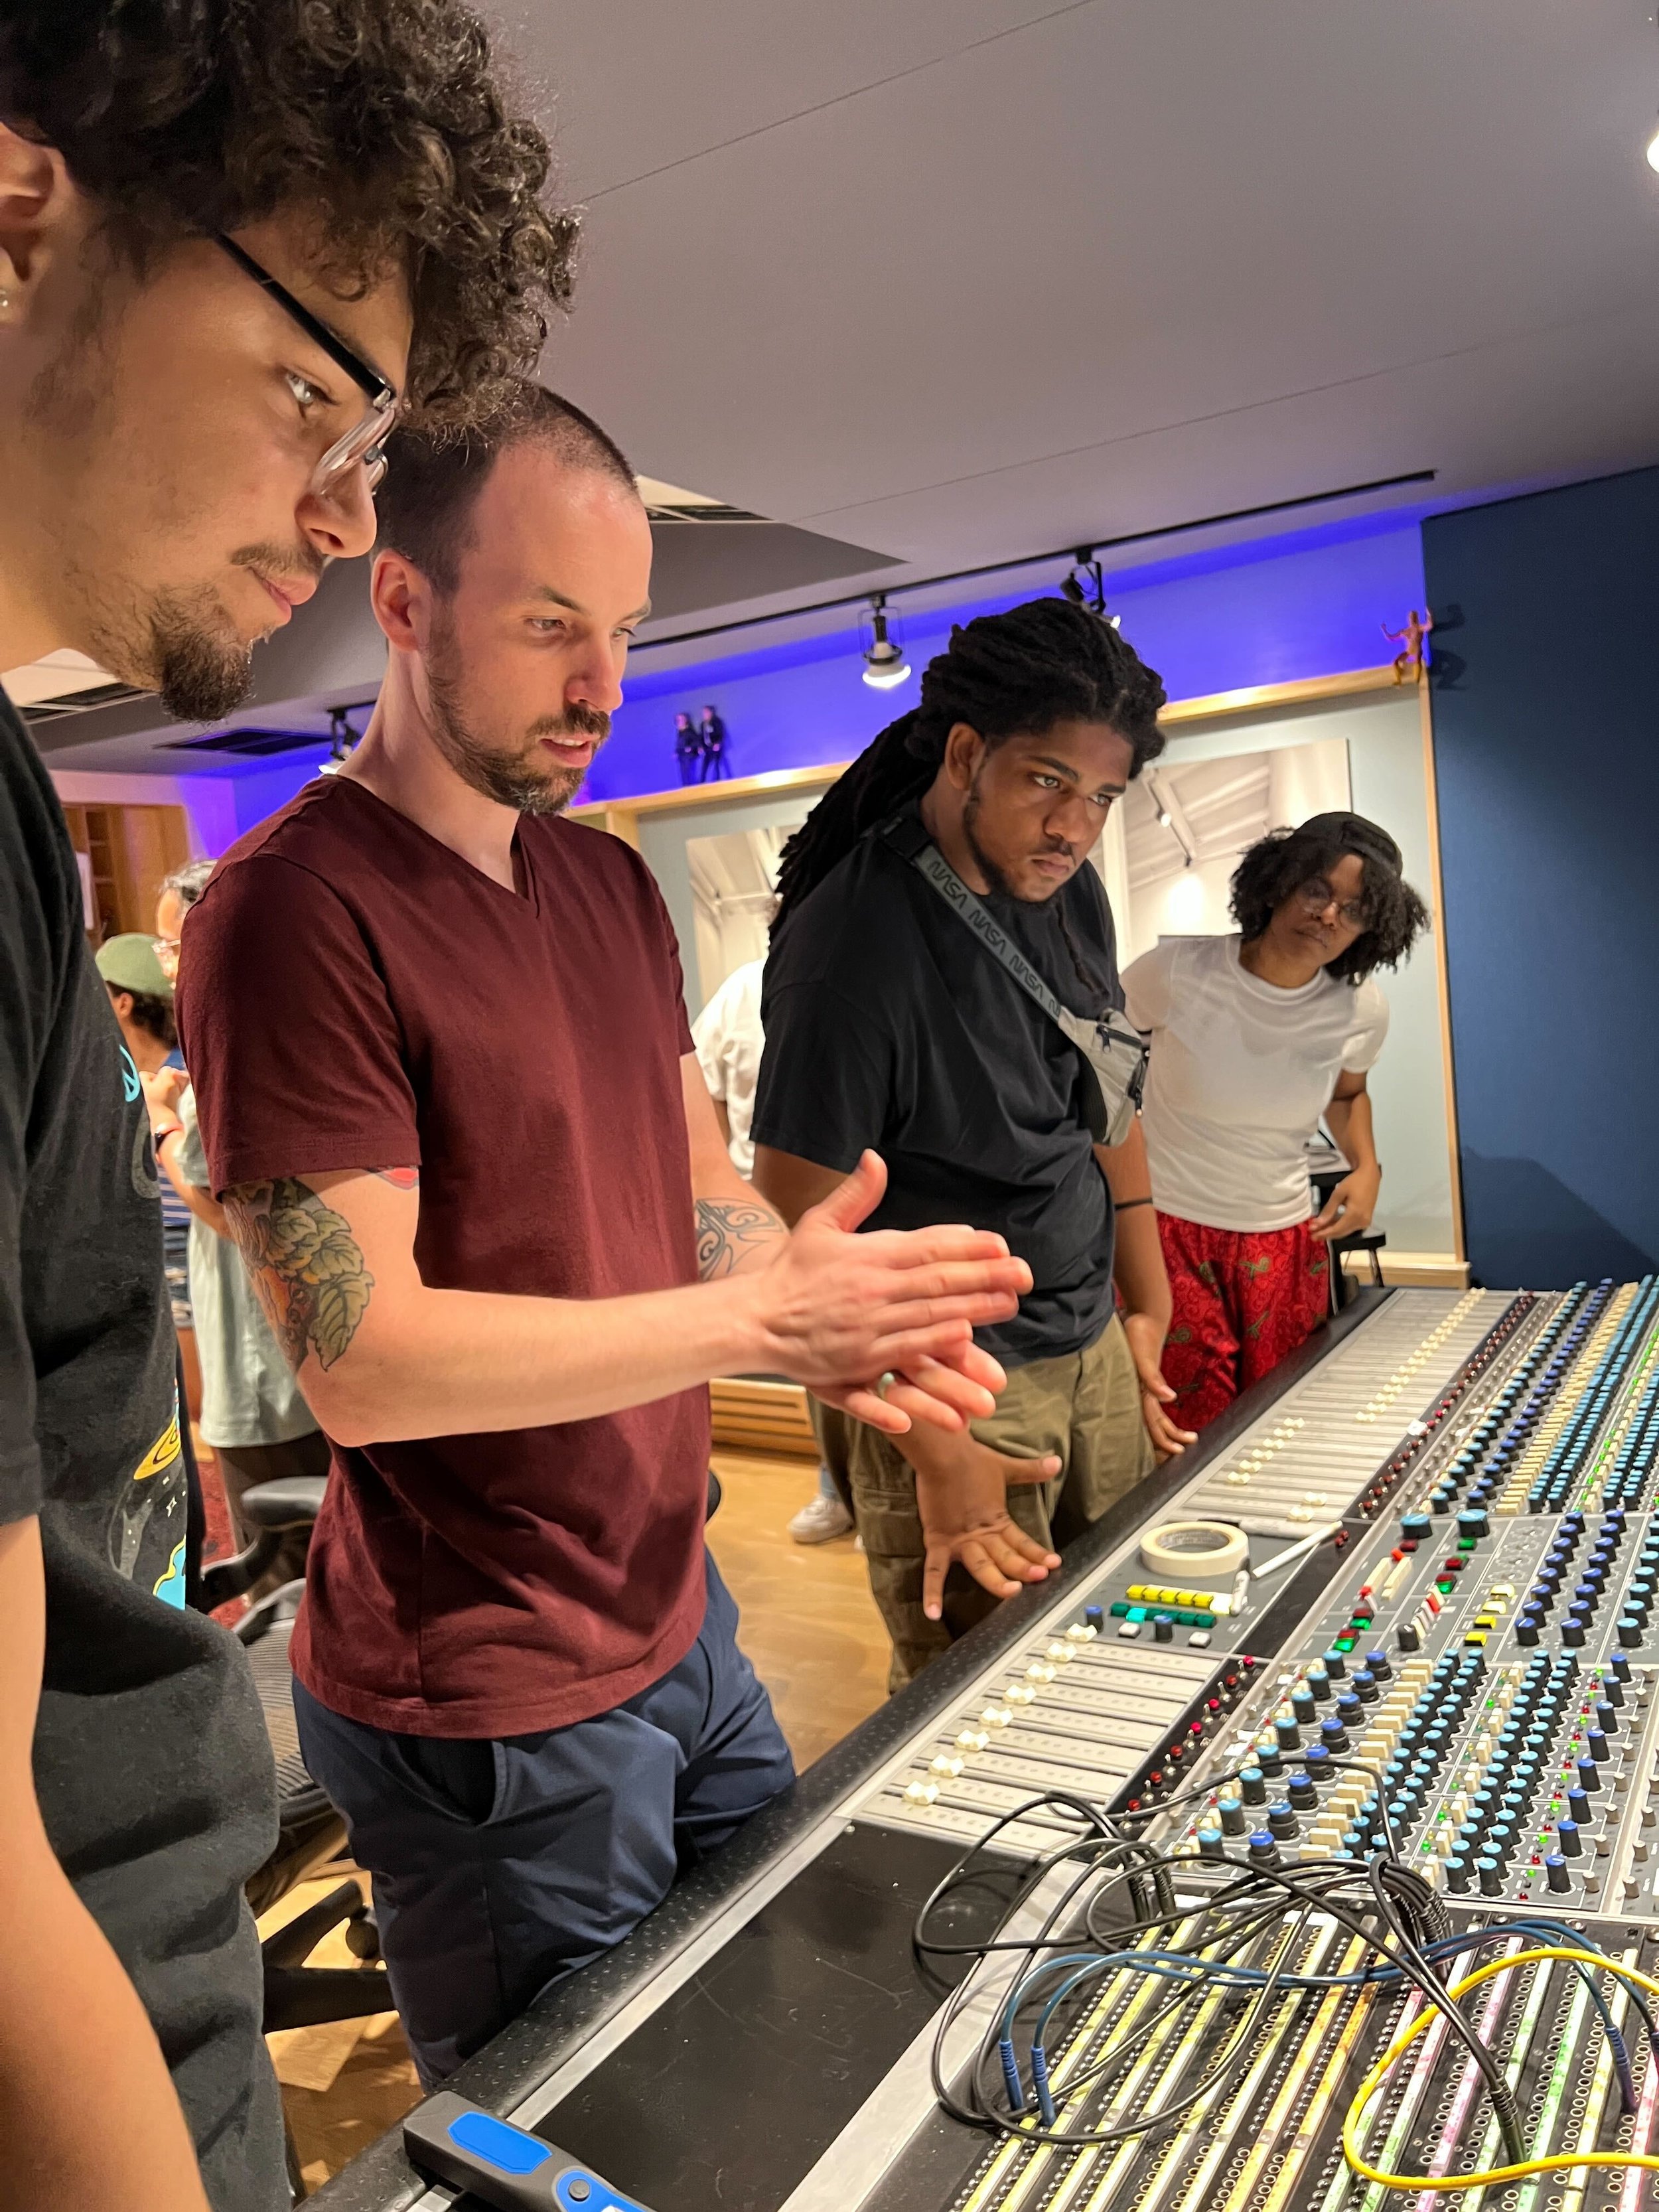   Apprentices Nino Leite, Kuran Freeman, and Noel O’Neil learn about the mixer/soundboard  